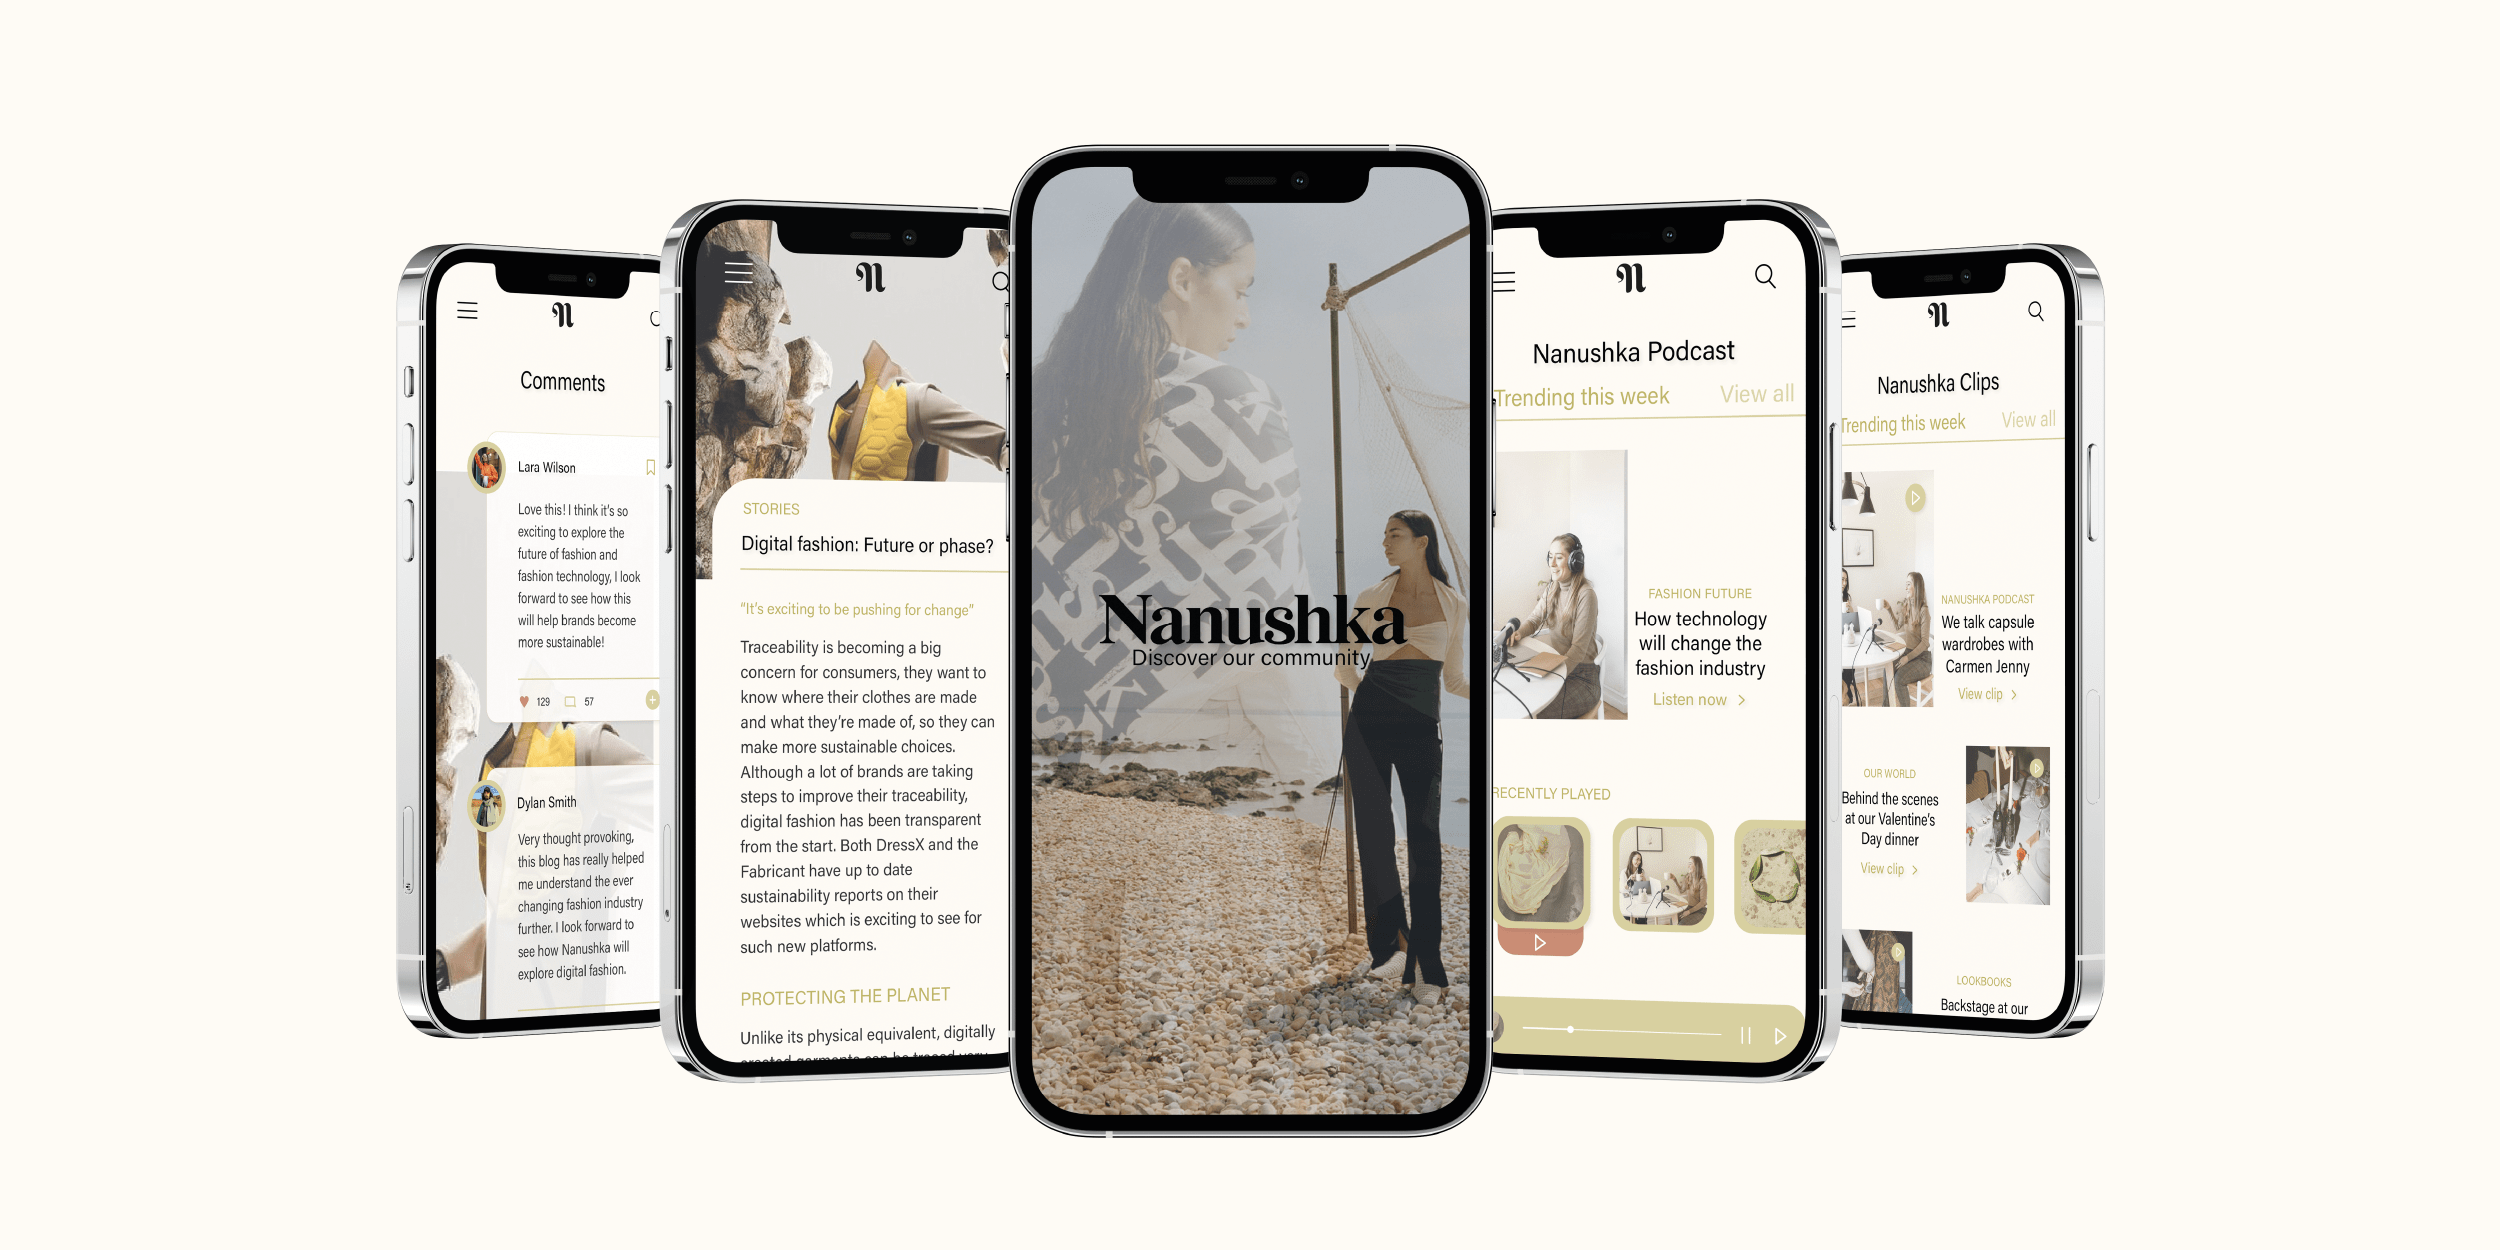 Mock-up shows an app proposal design by fashion communication and promotion student Jodie Moss. The app features a podcast, blog, behind the scenes video clips and comment section.